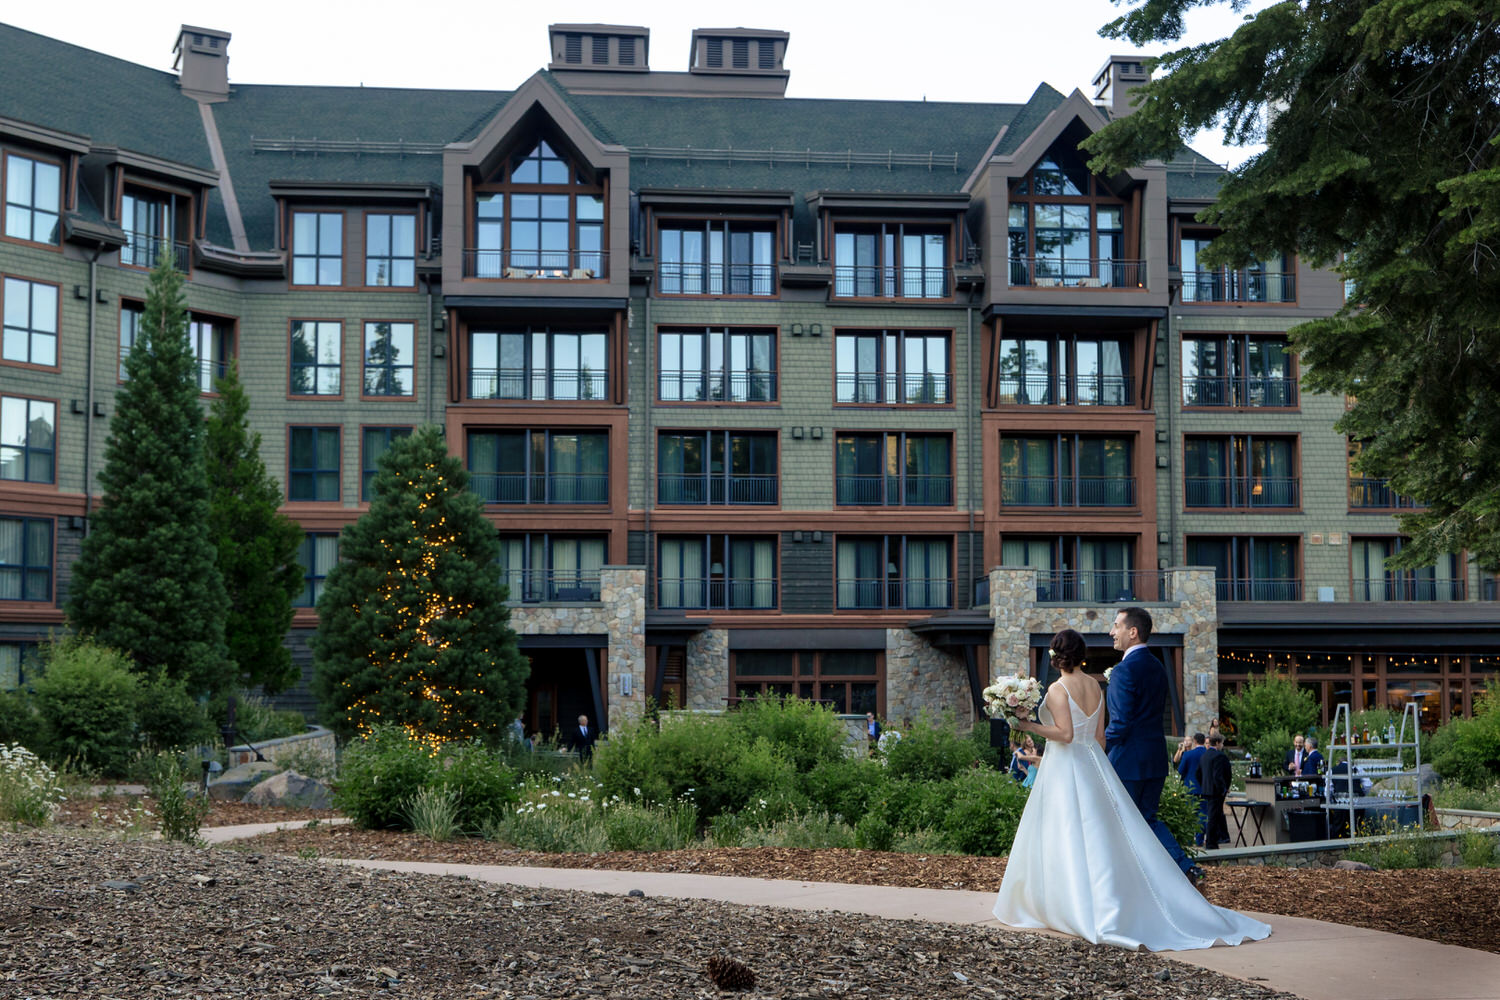 The bride and groom walk to the Fireside Terrace, an outdoor cocktail hour location.